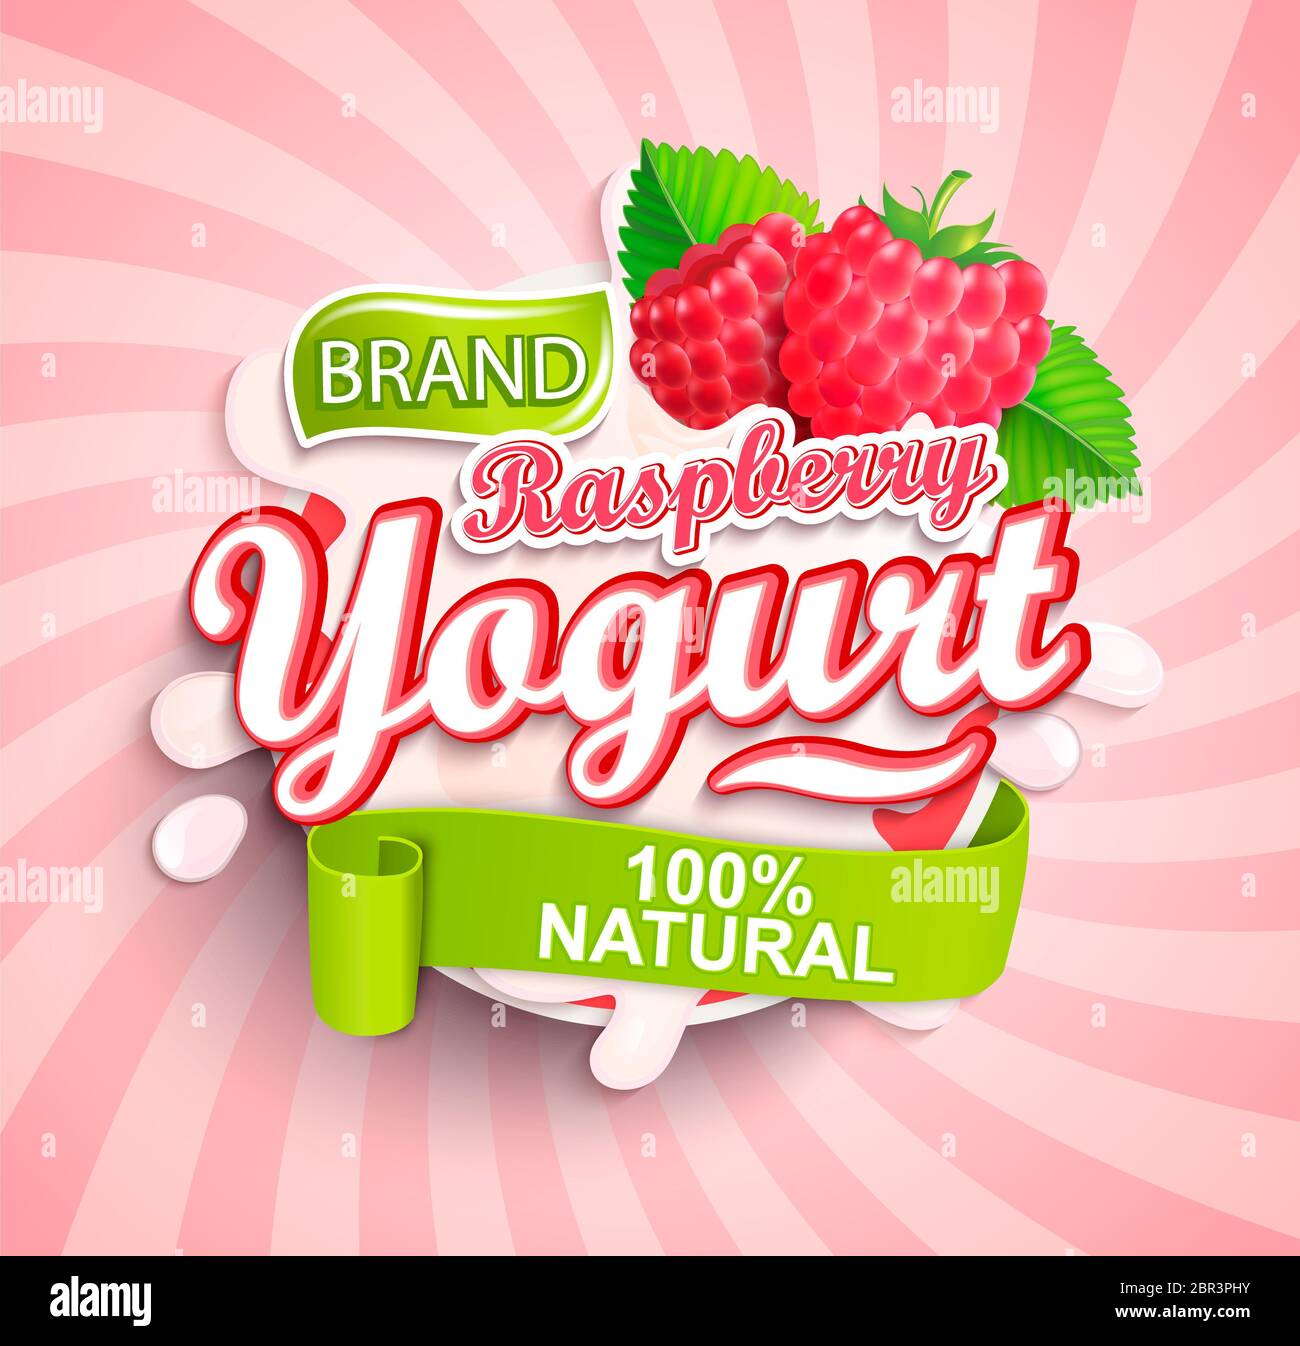 Natural and fresh raspberry Yogurt logo splash on sunburst background for your brand, template, label, emblem for groceries, stores, packaging, packin Stock Photo